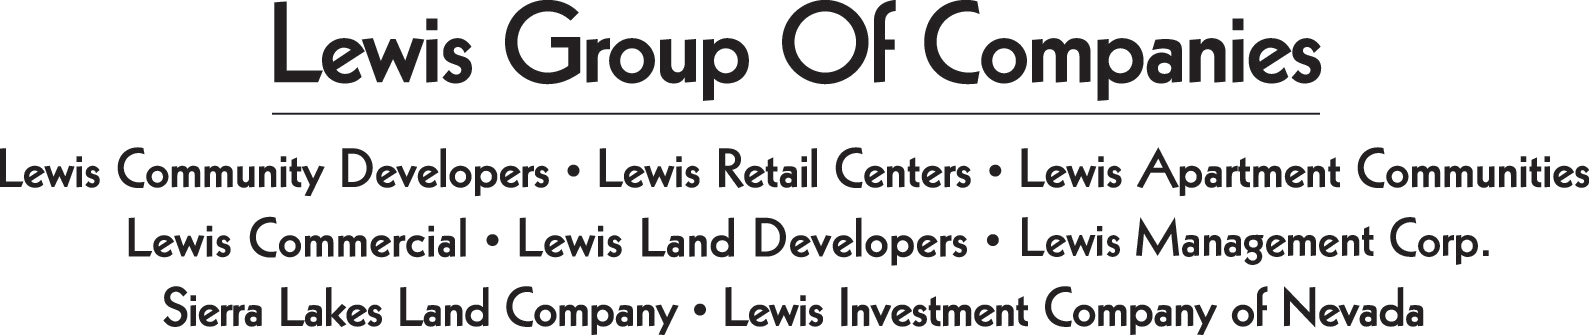 17_PP_Lewis-Group-Logo_PNG.png